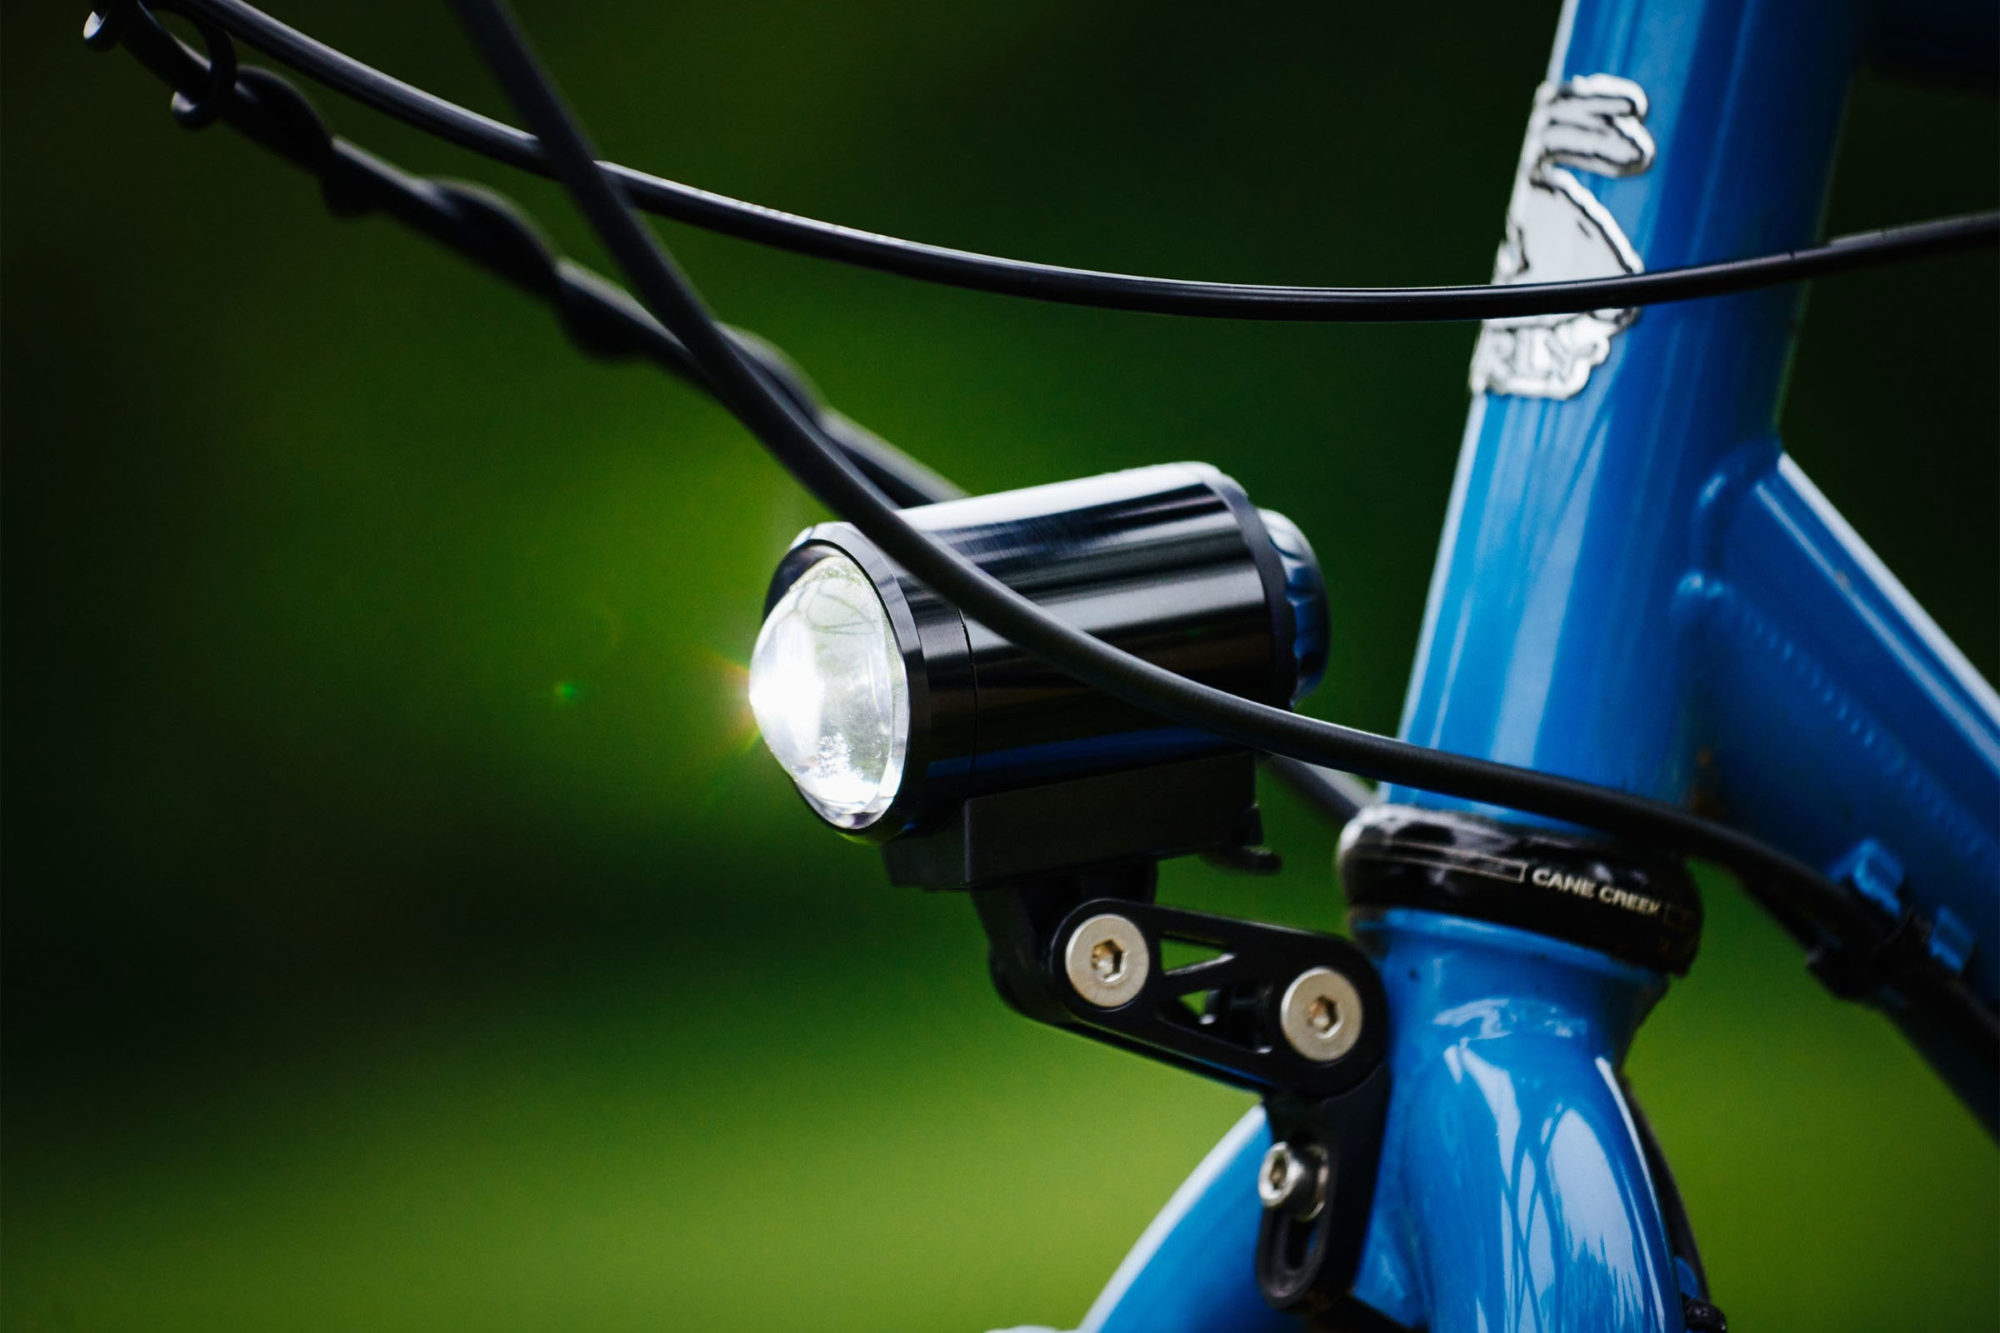 Does it help to use bike lights during the daytime?